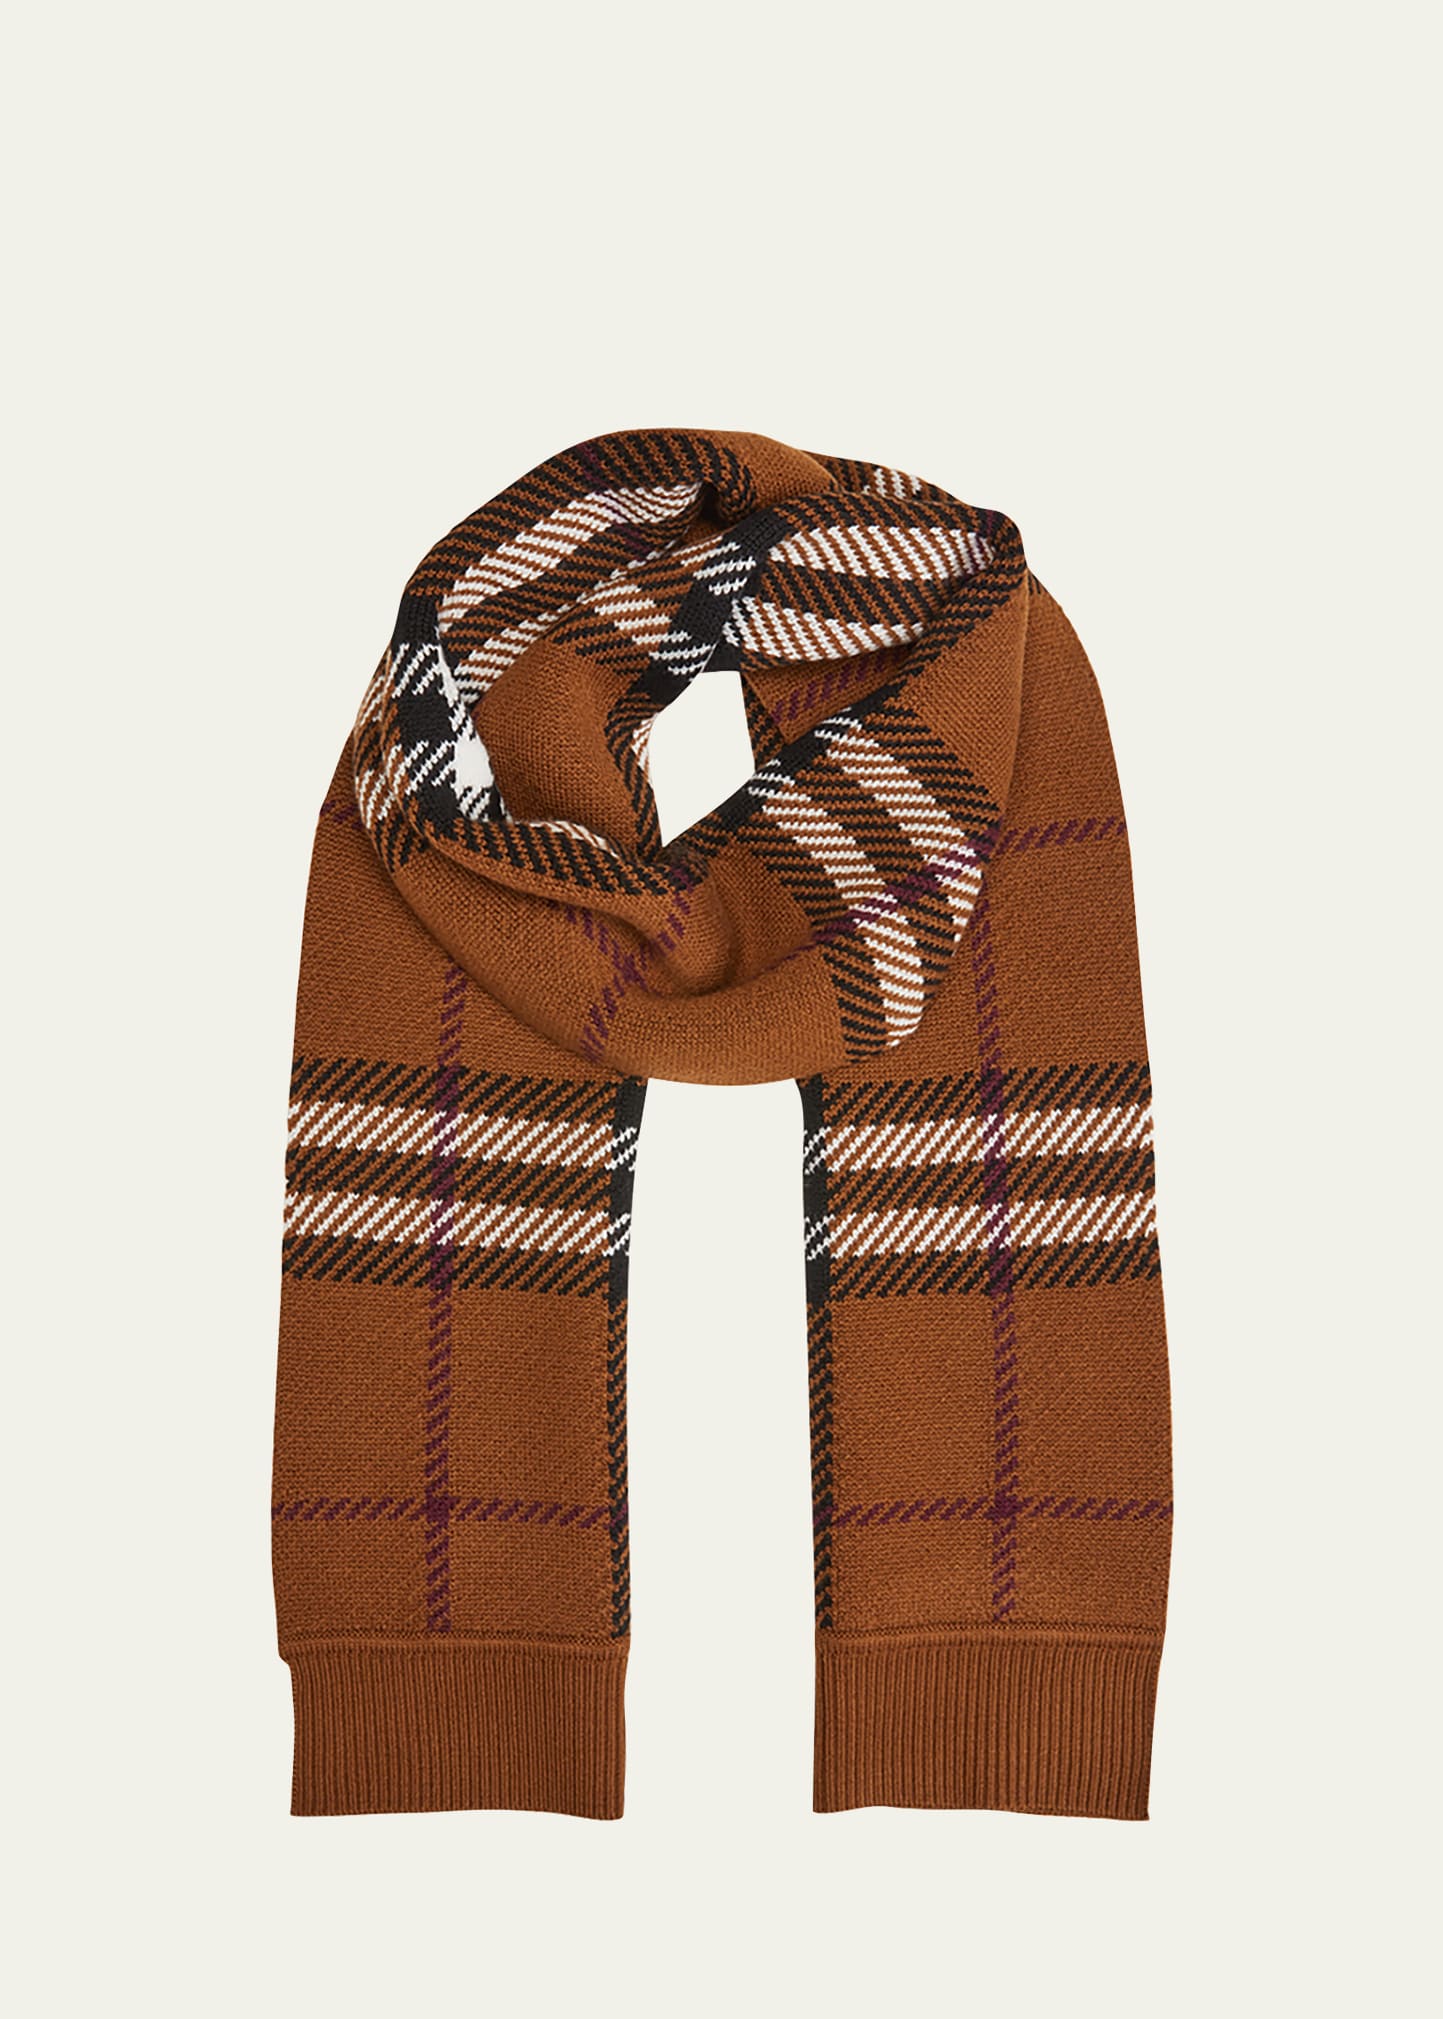 Knitted Merino Wool Oblong Check Scarf